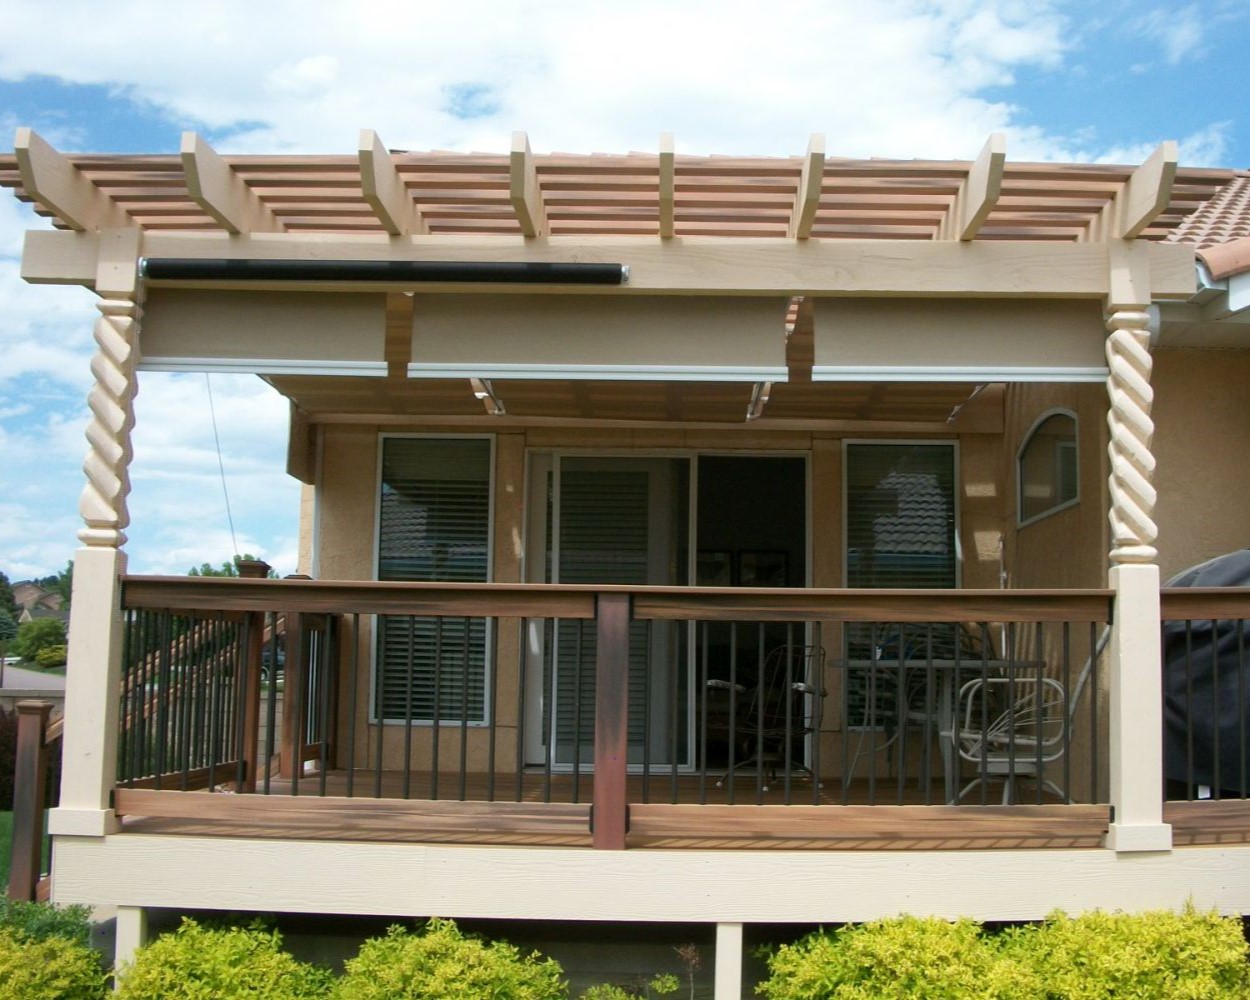 A composite deck with pergola featuring partially twisted support beams.